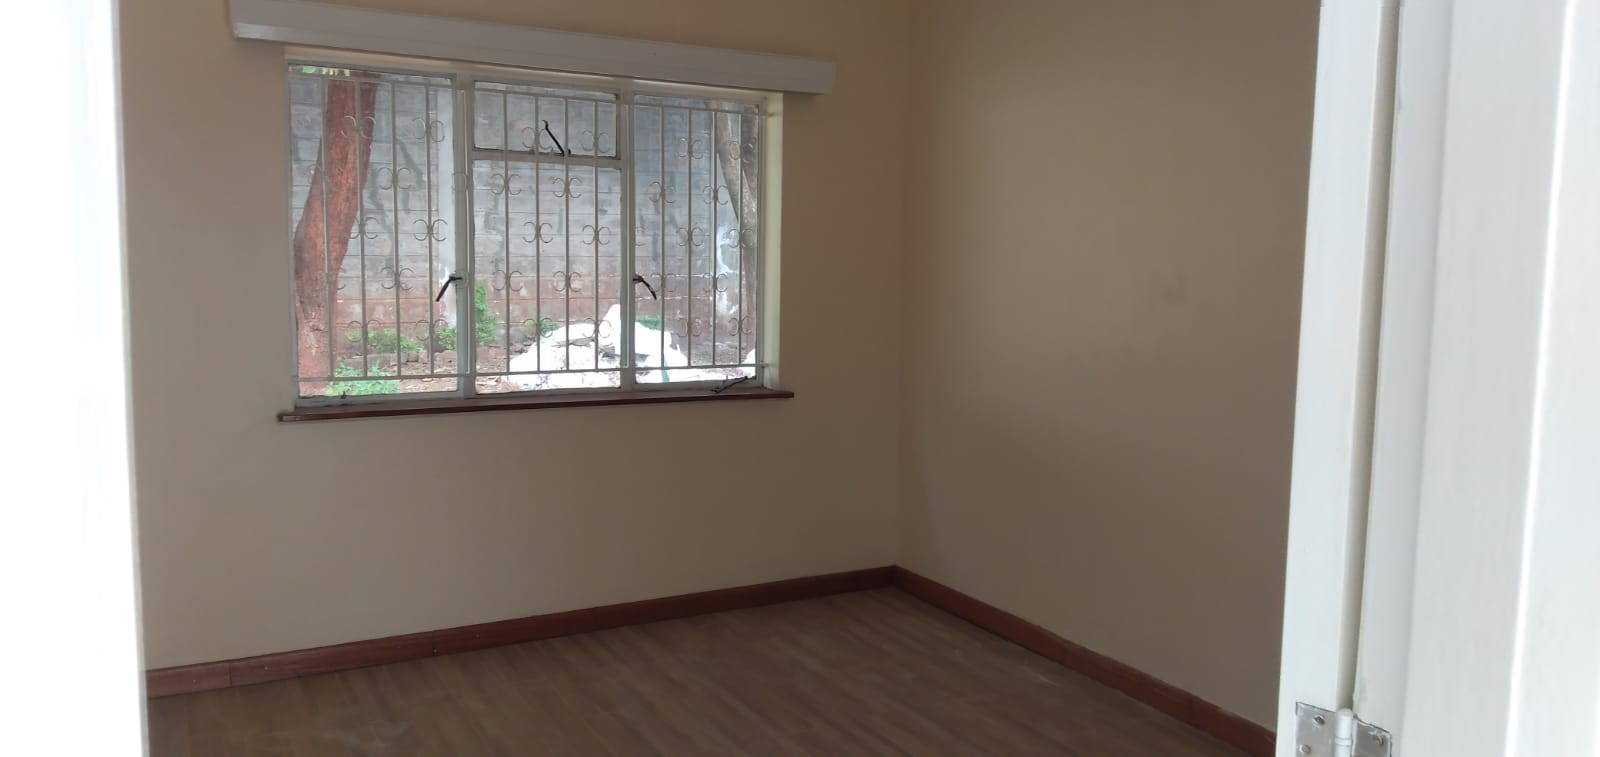 Lovely 5 Bedroom Villa for Rent in Lower Kabete, along Ngecha Road, from ksh450k per Month with exciting Amenities31